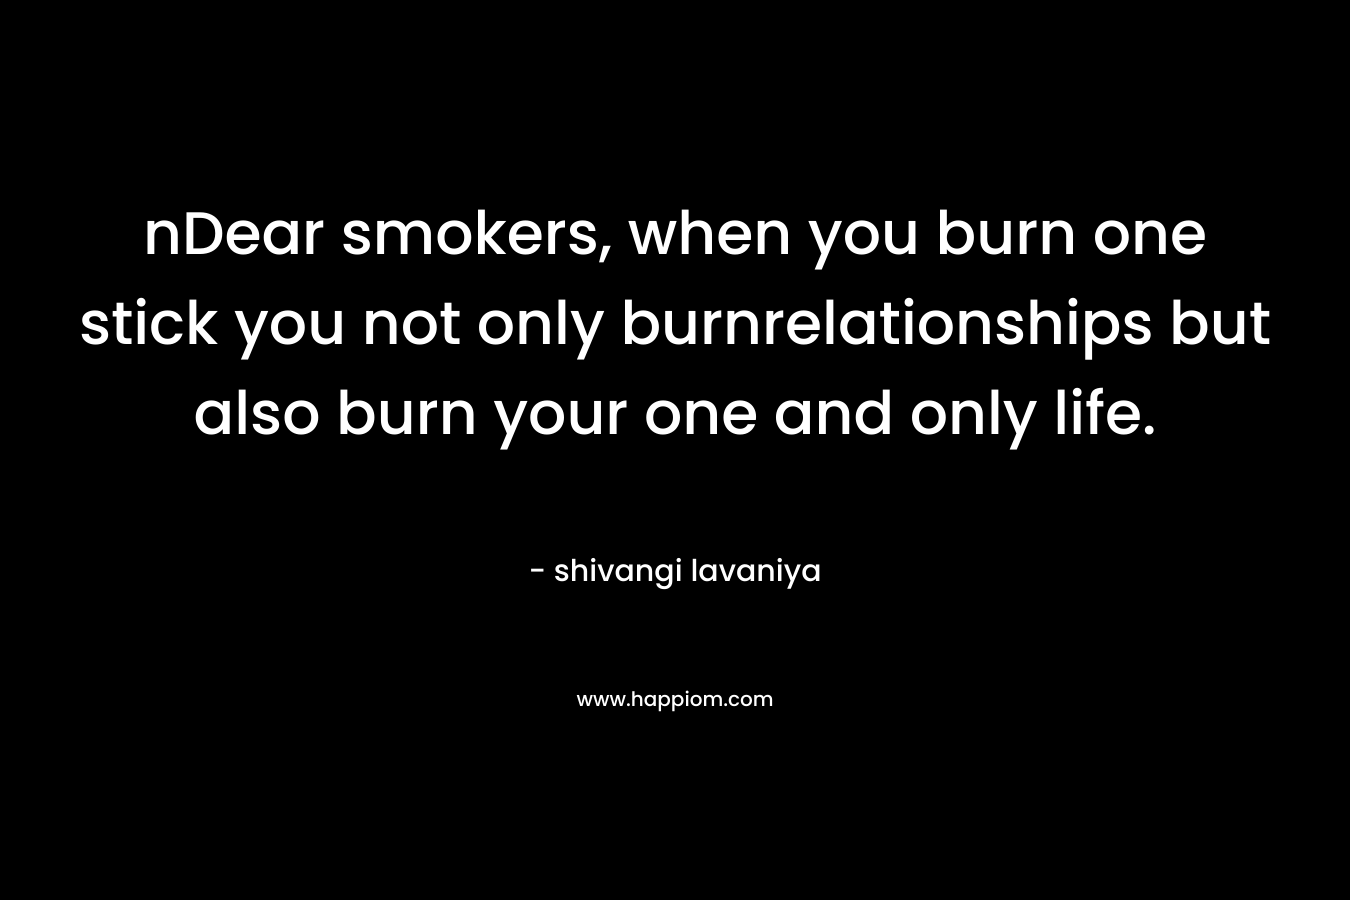 nDear smokers, when you burn one stick you not only burnrelationships but also burn your one and only life.